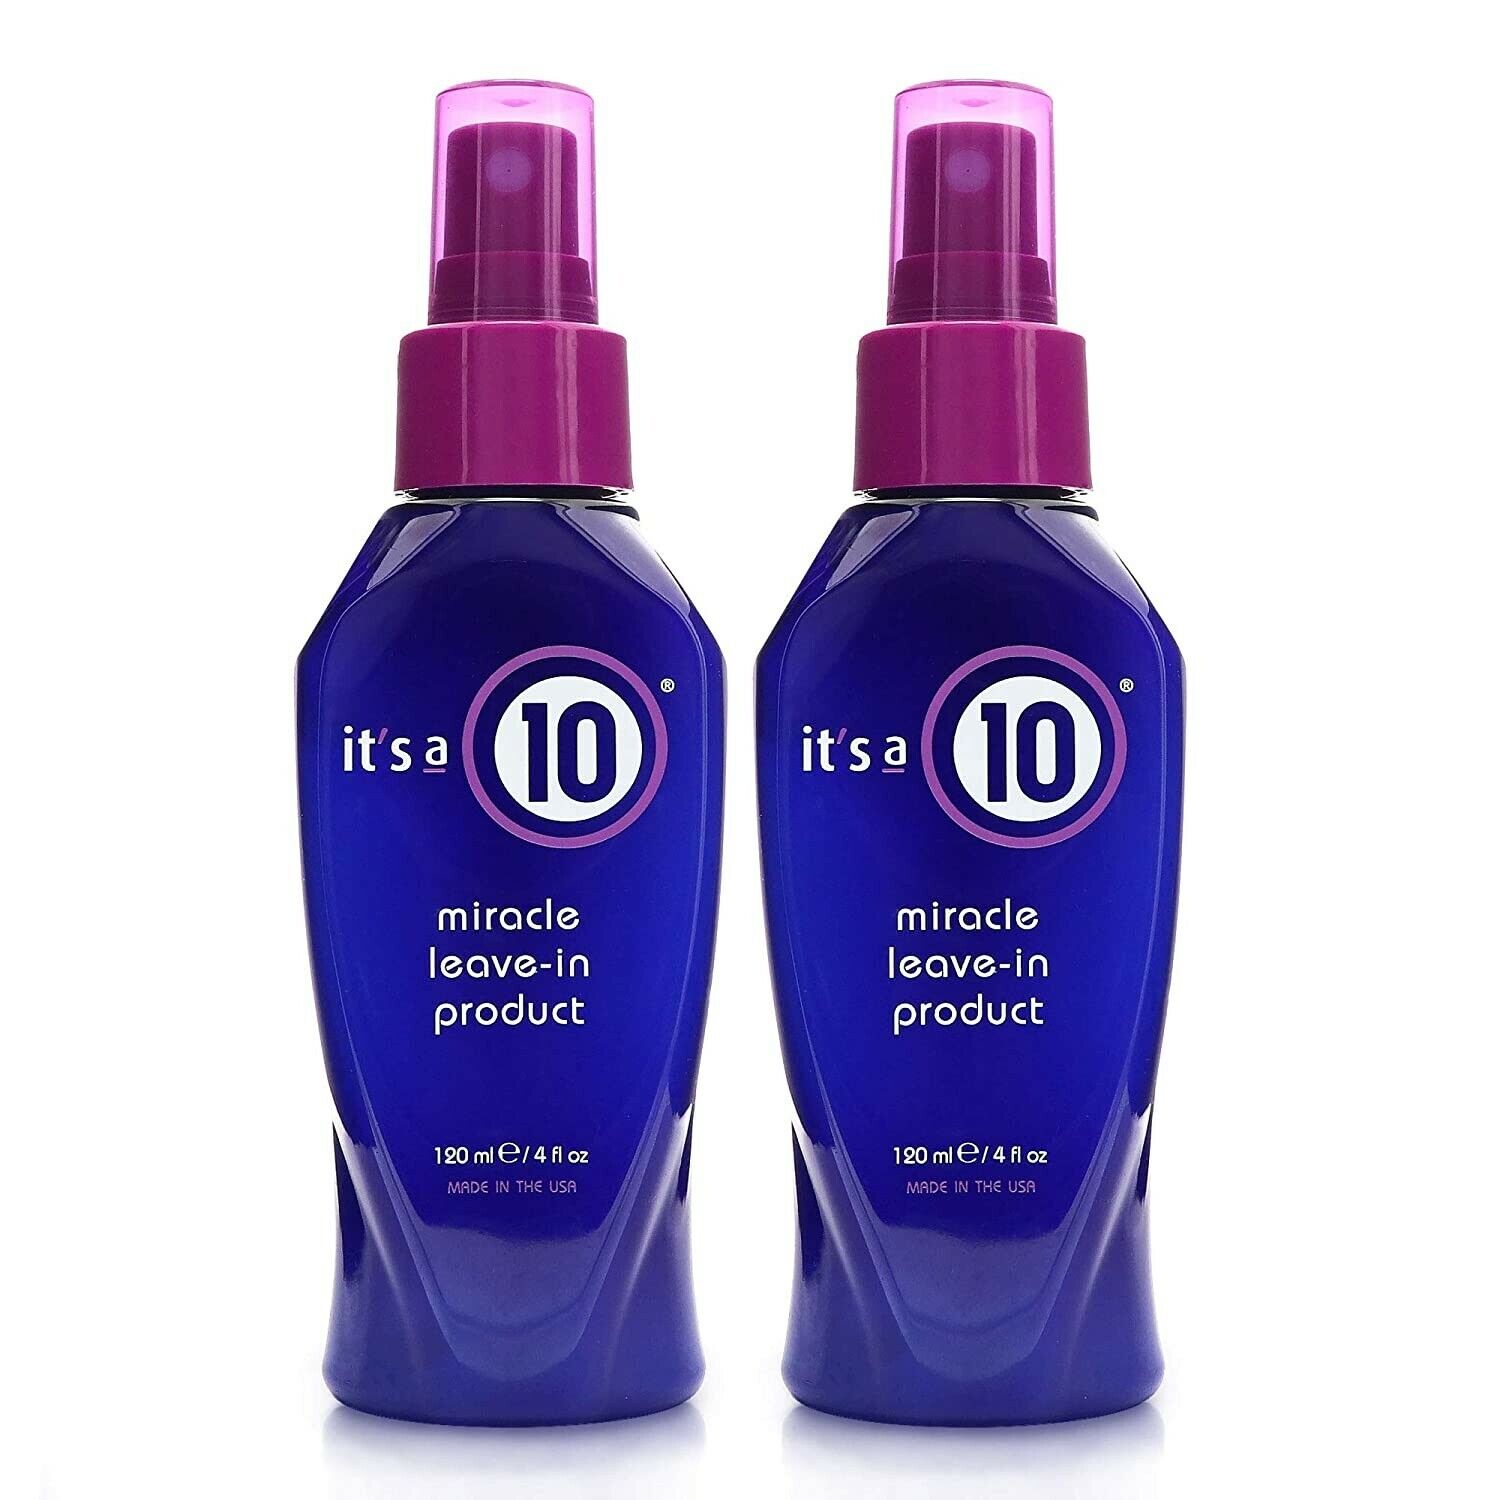 2 PACK!! It's a 10 Haircare Miracle Leave-In Conditioner - 4 oz